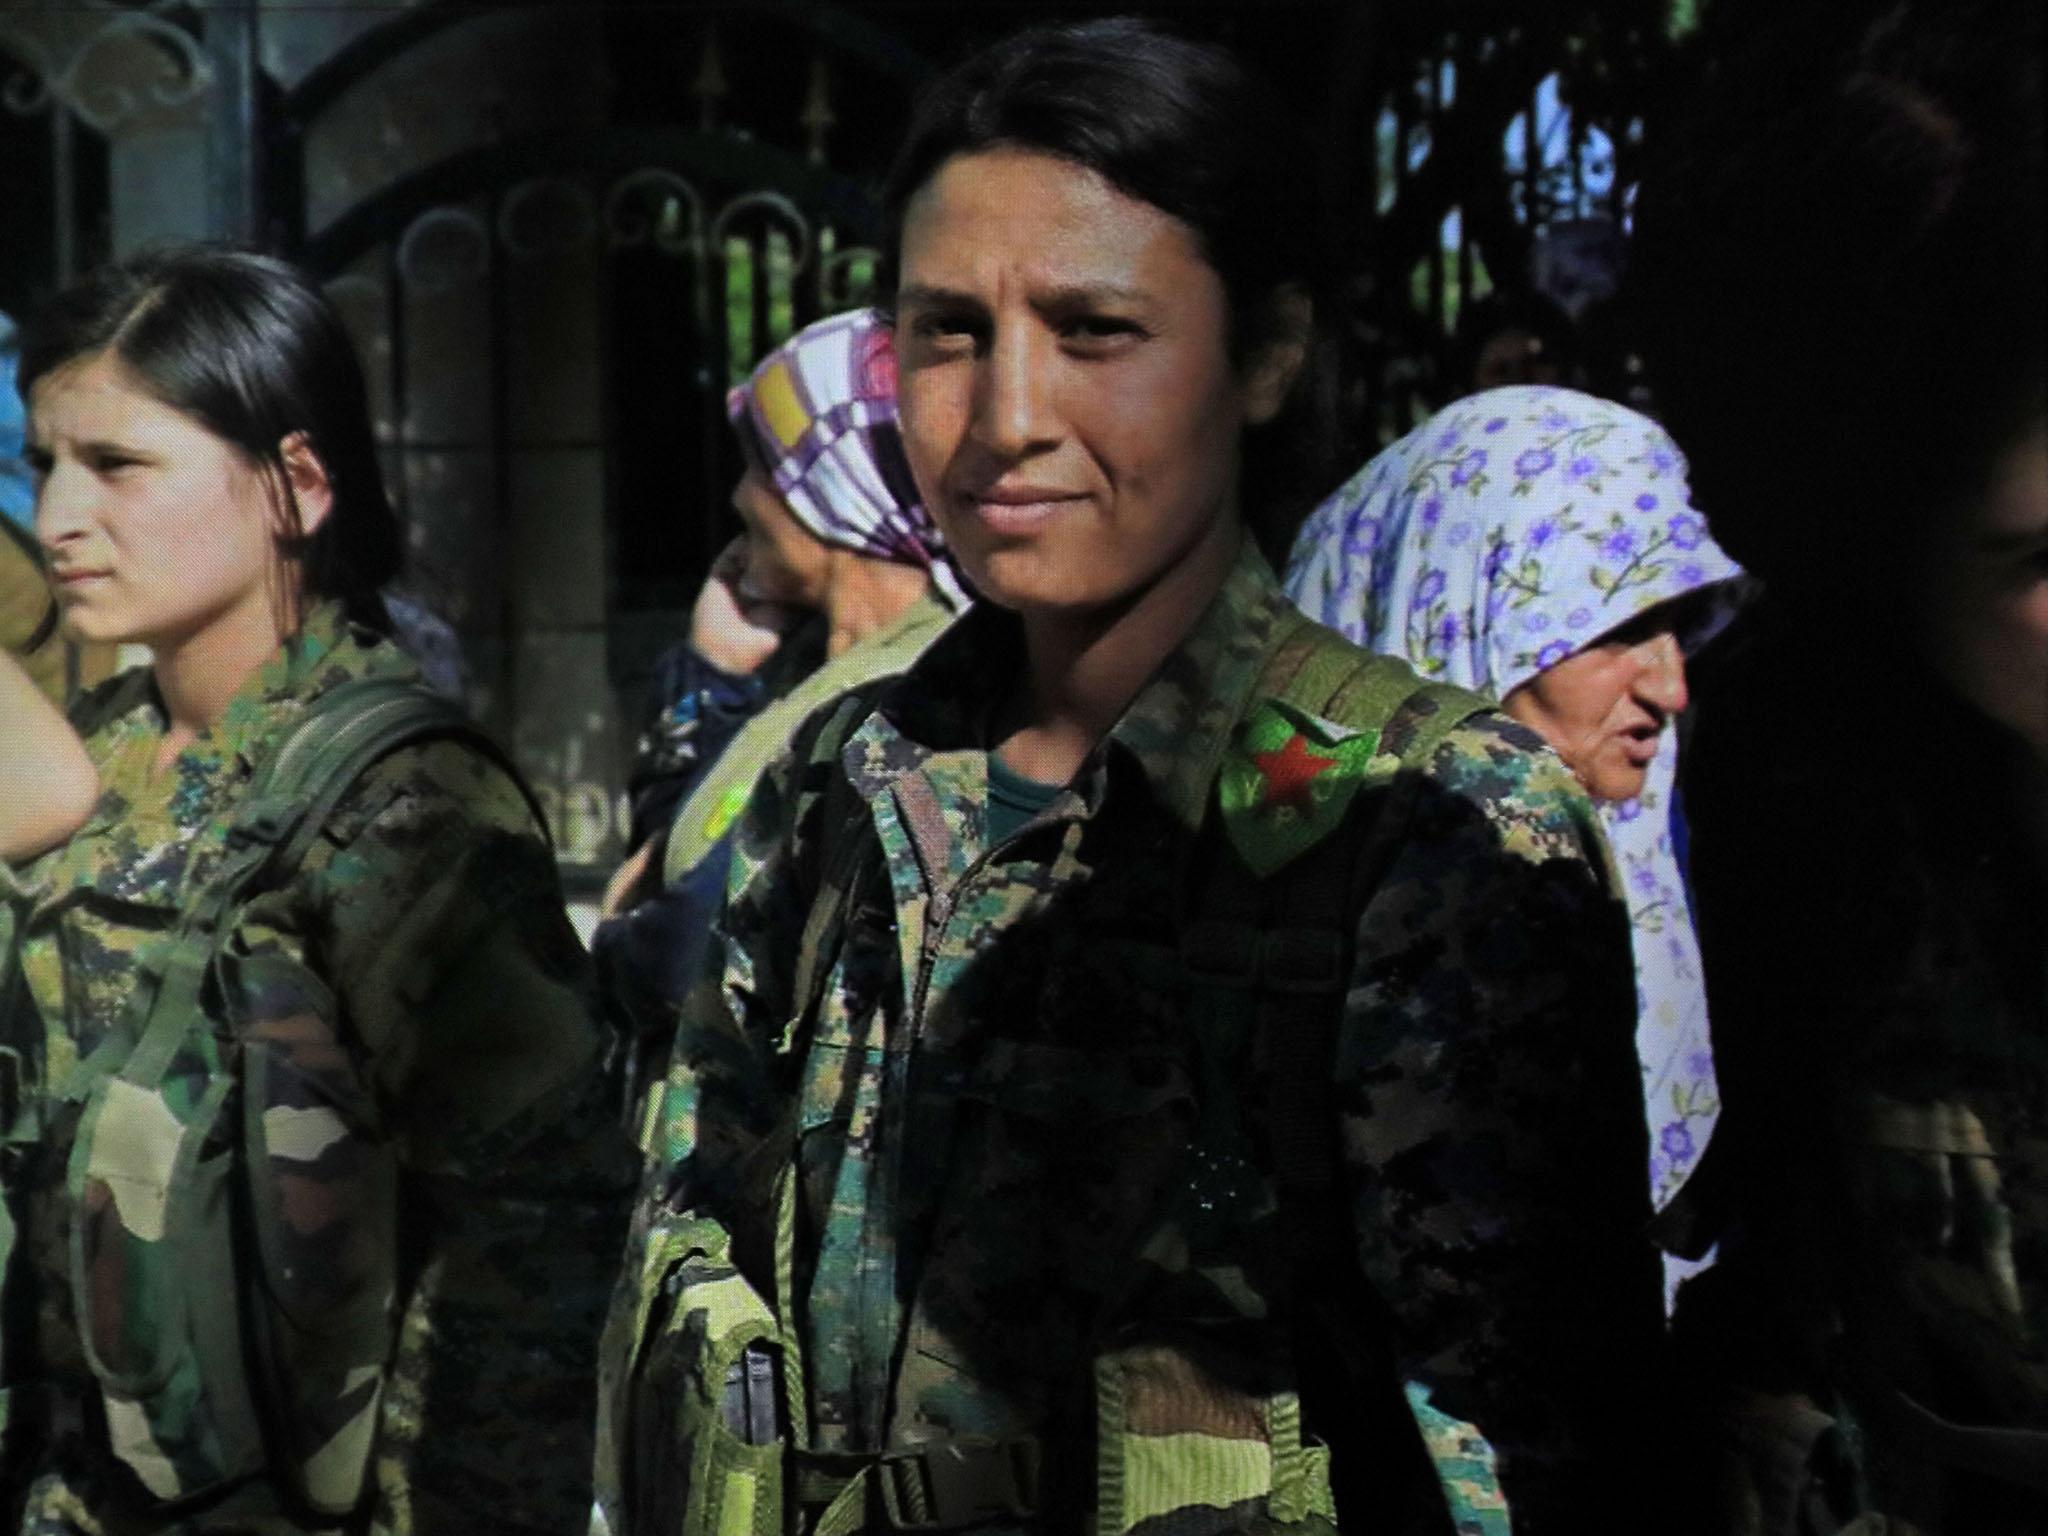 Barin Kobani, centre, was killed in action in Qurna early this week